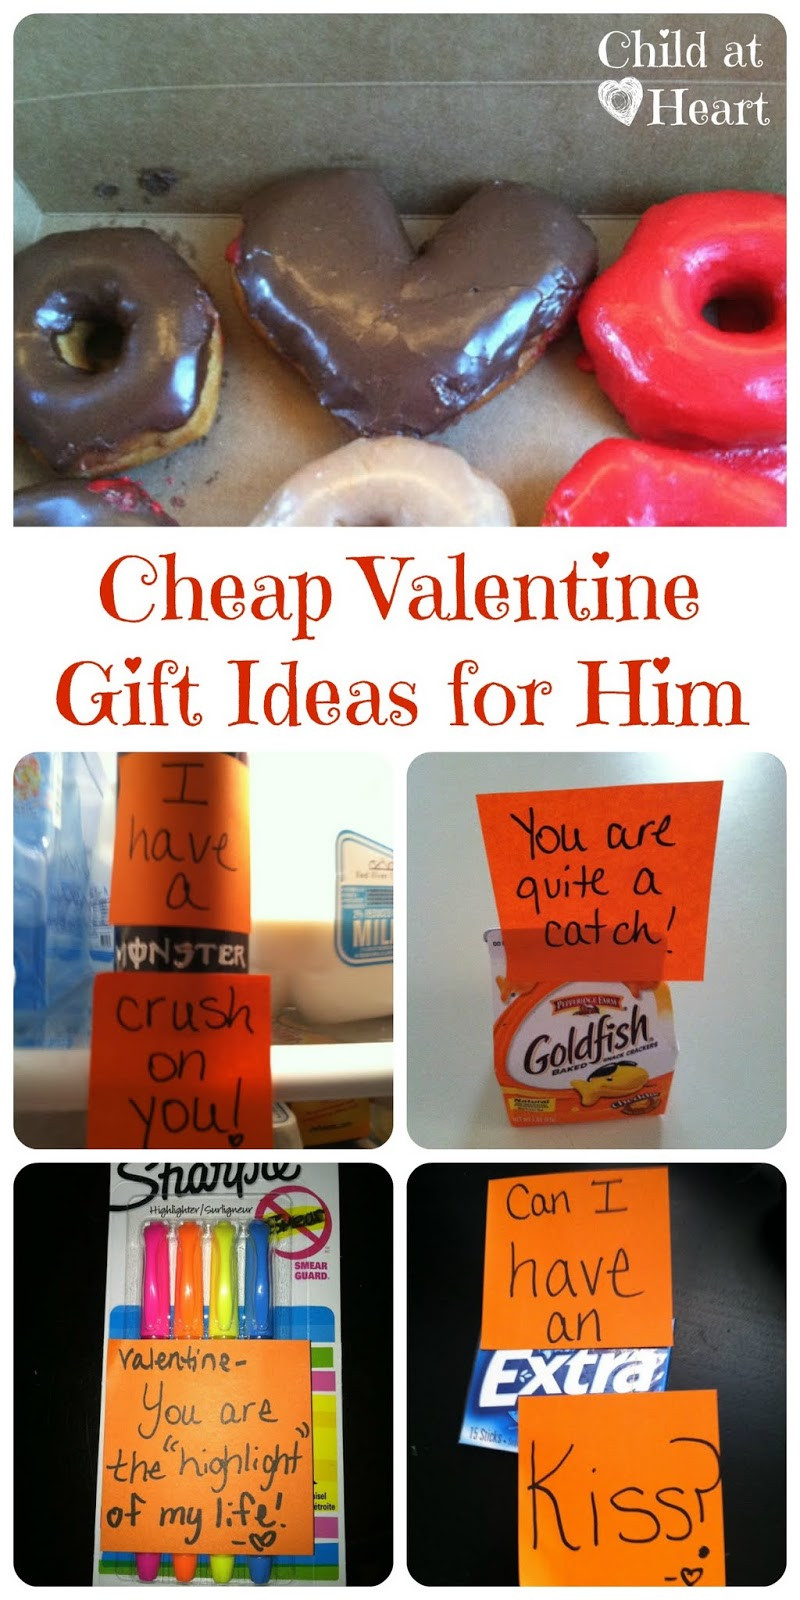 Valentine Day Gift Ideas For Him
 Cheap Valentine Gift Ideas for Him Child at Heart Blog